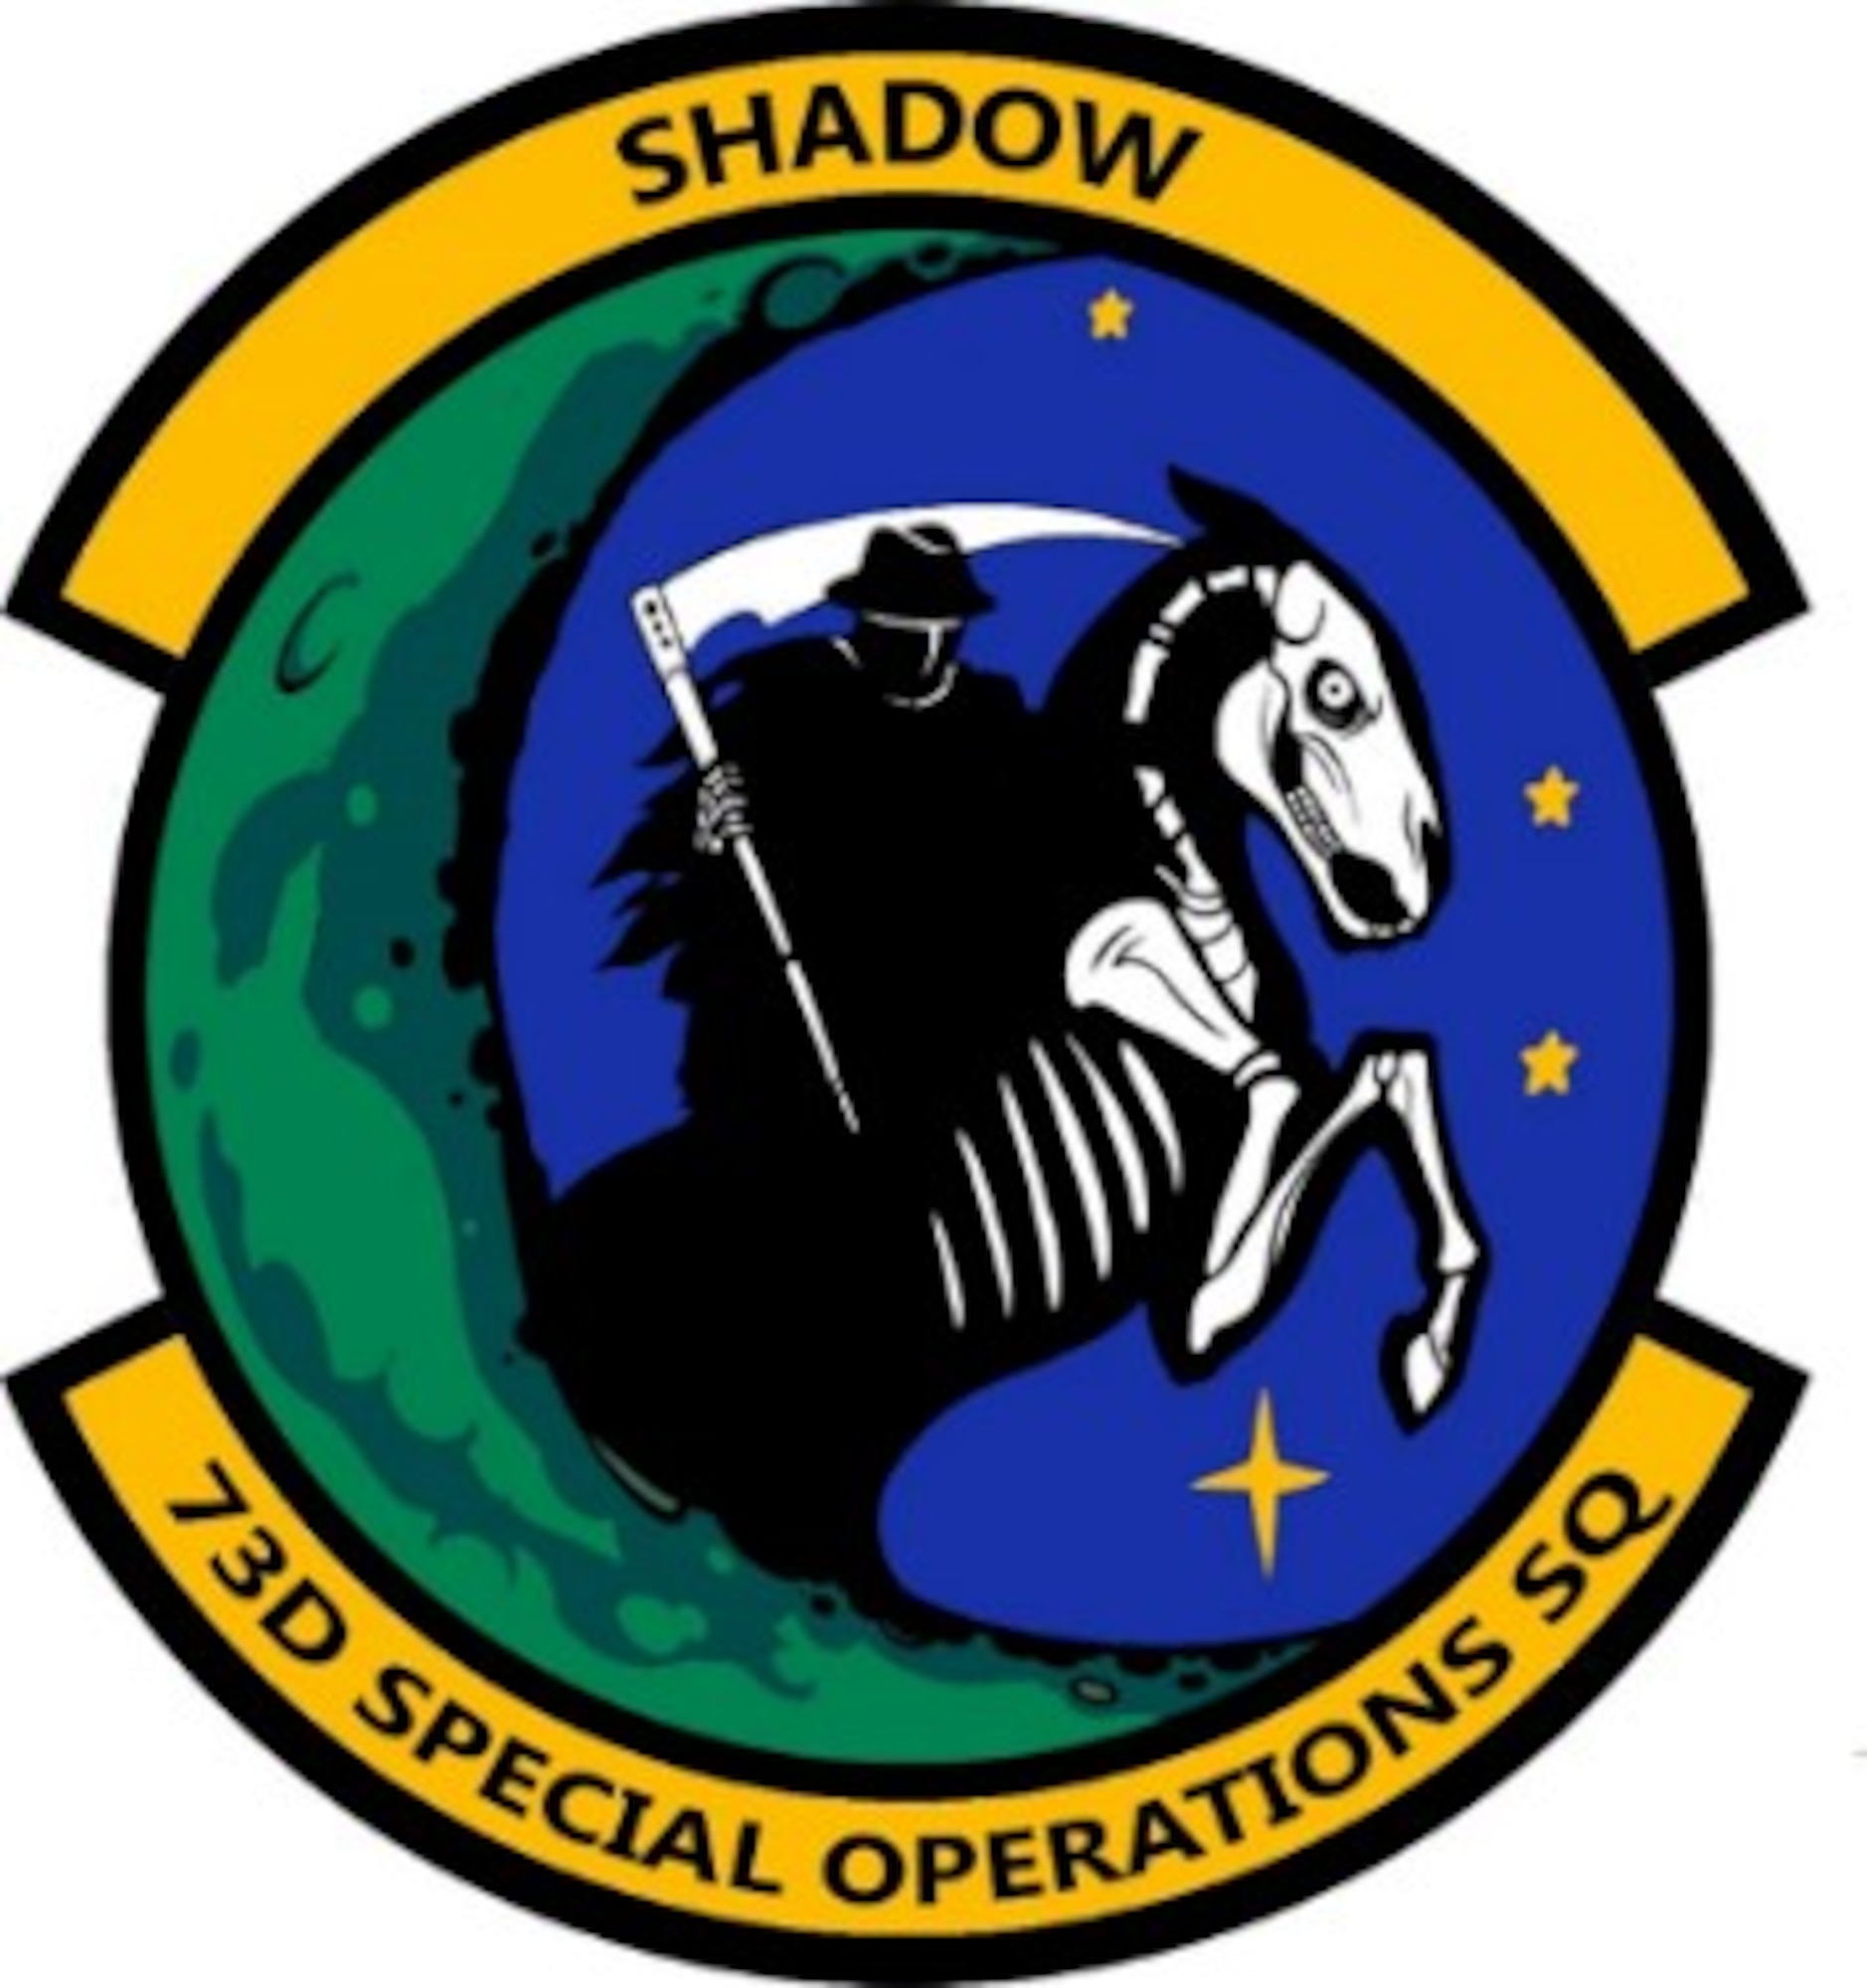 Graphic of a squadron's official emblem. Yellow, blue, black and green are the colors present.